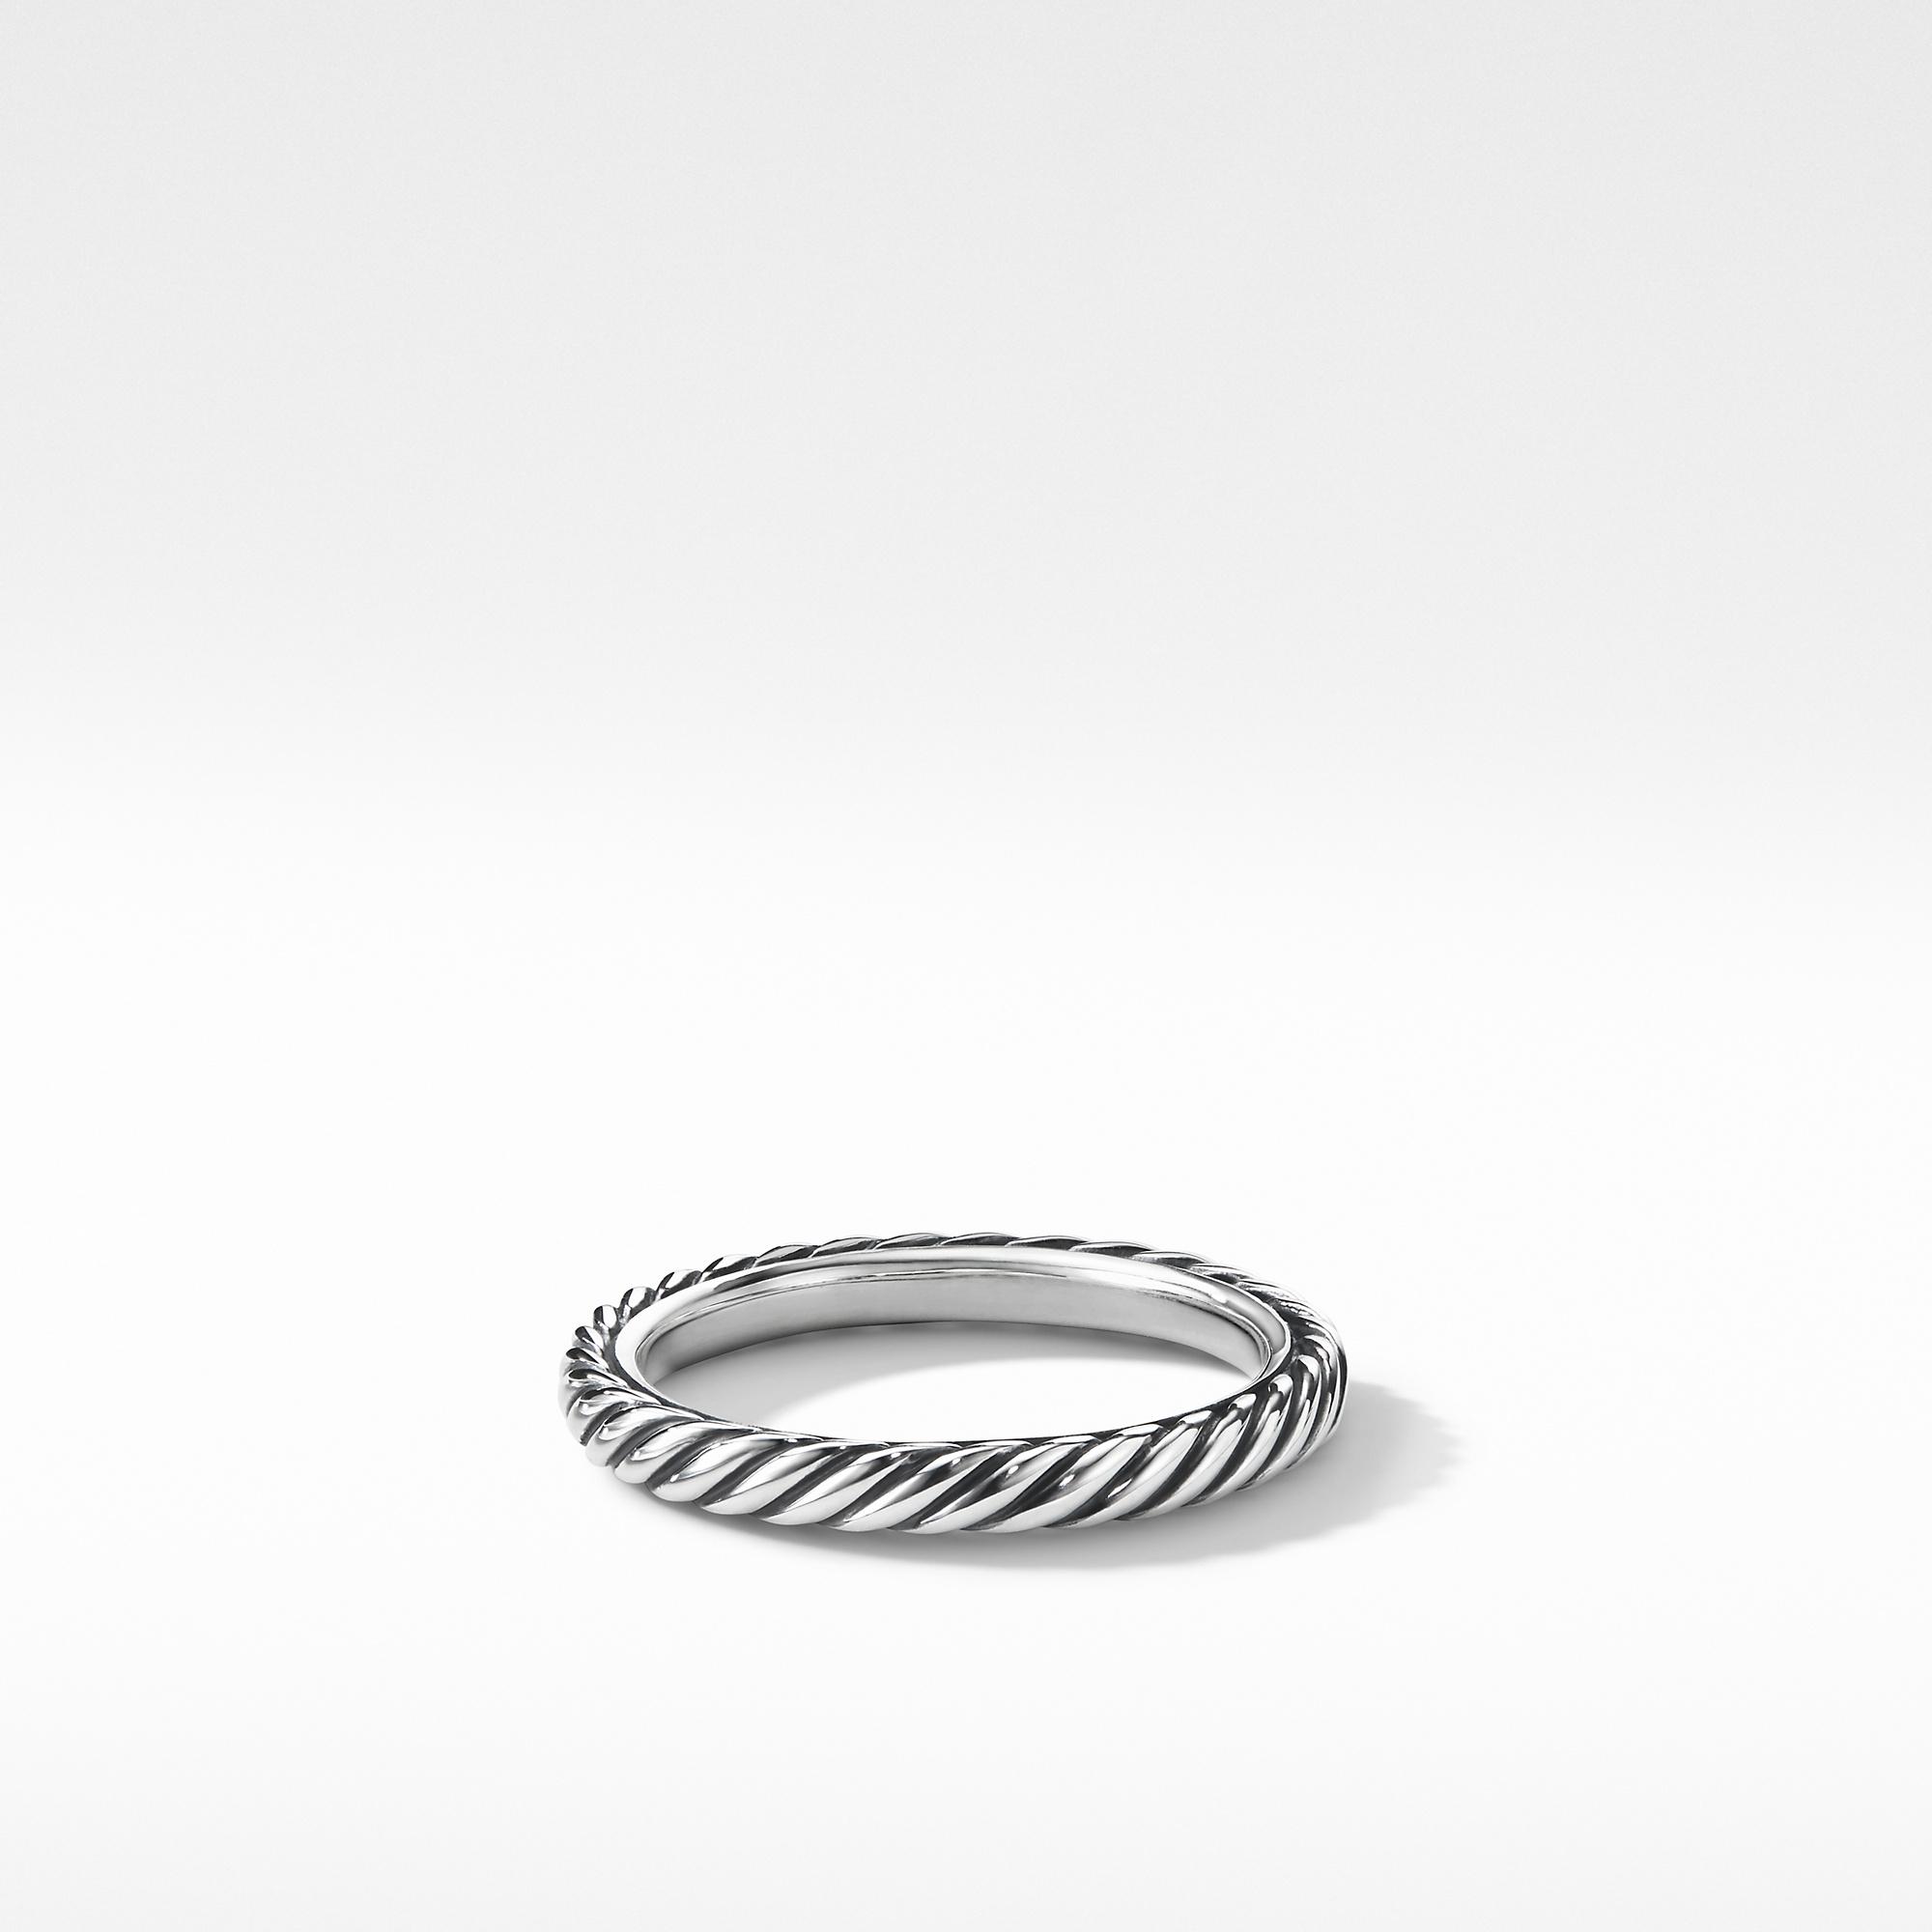 David Yurman Cable Classics Band Ring in Sterling Silver, size 6